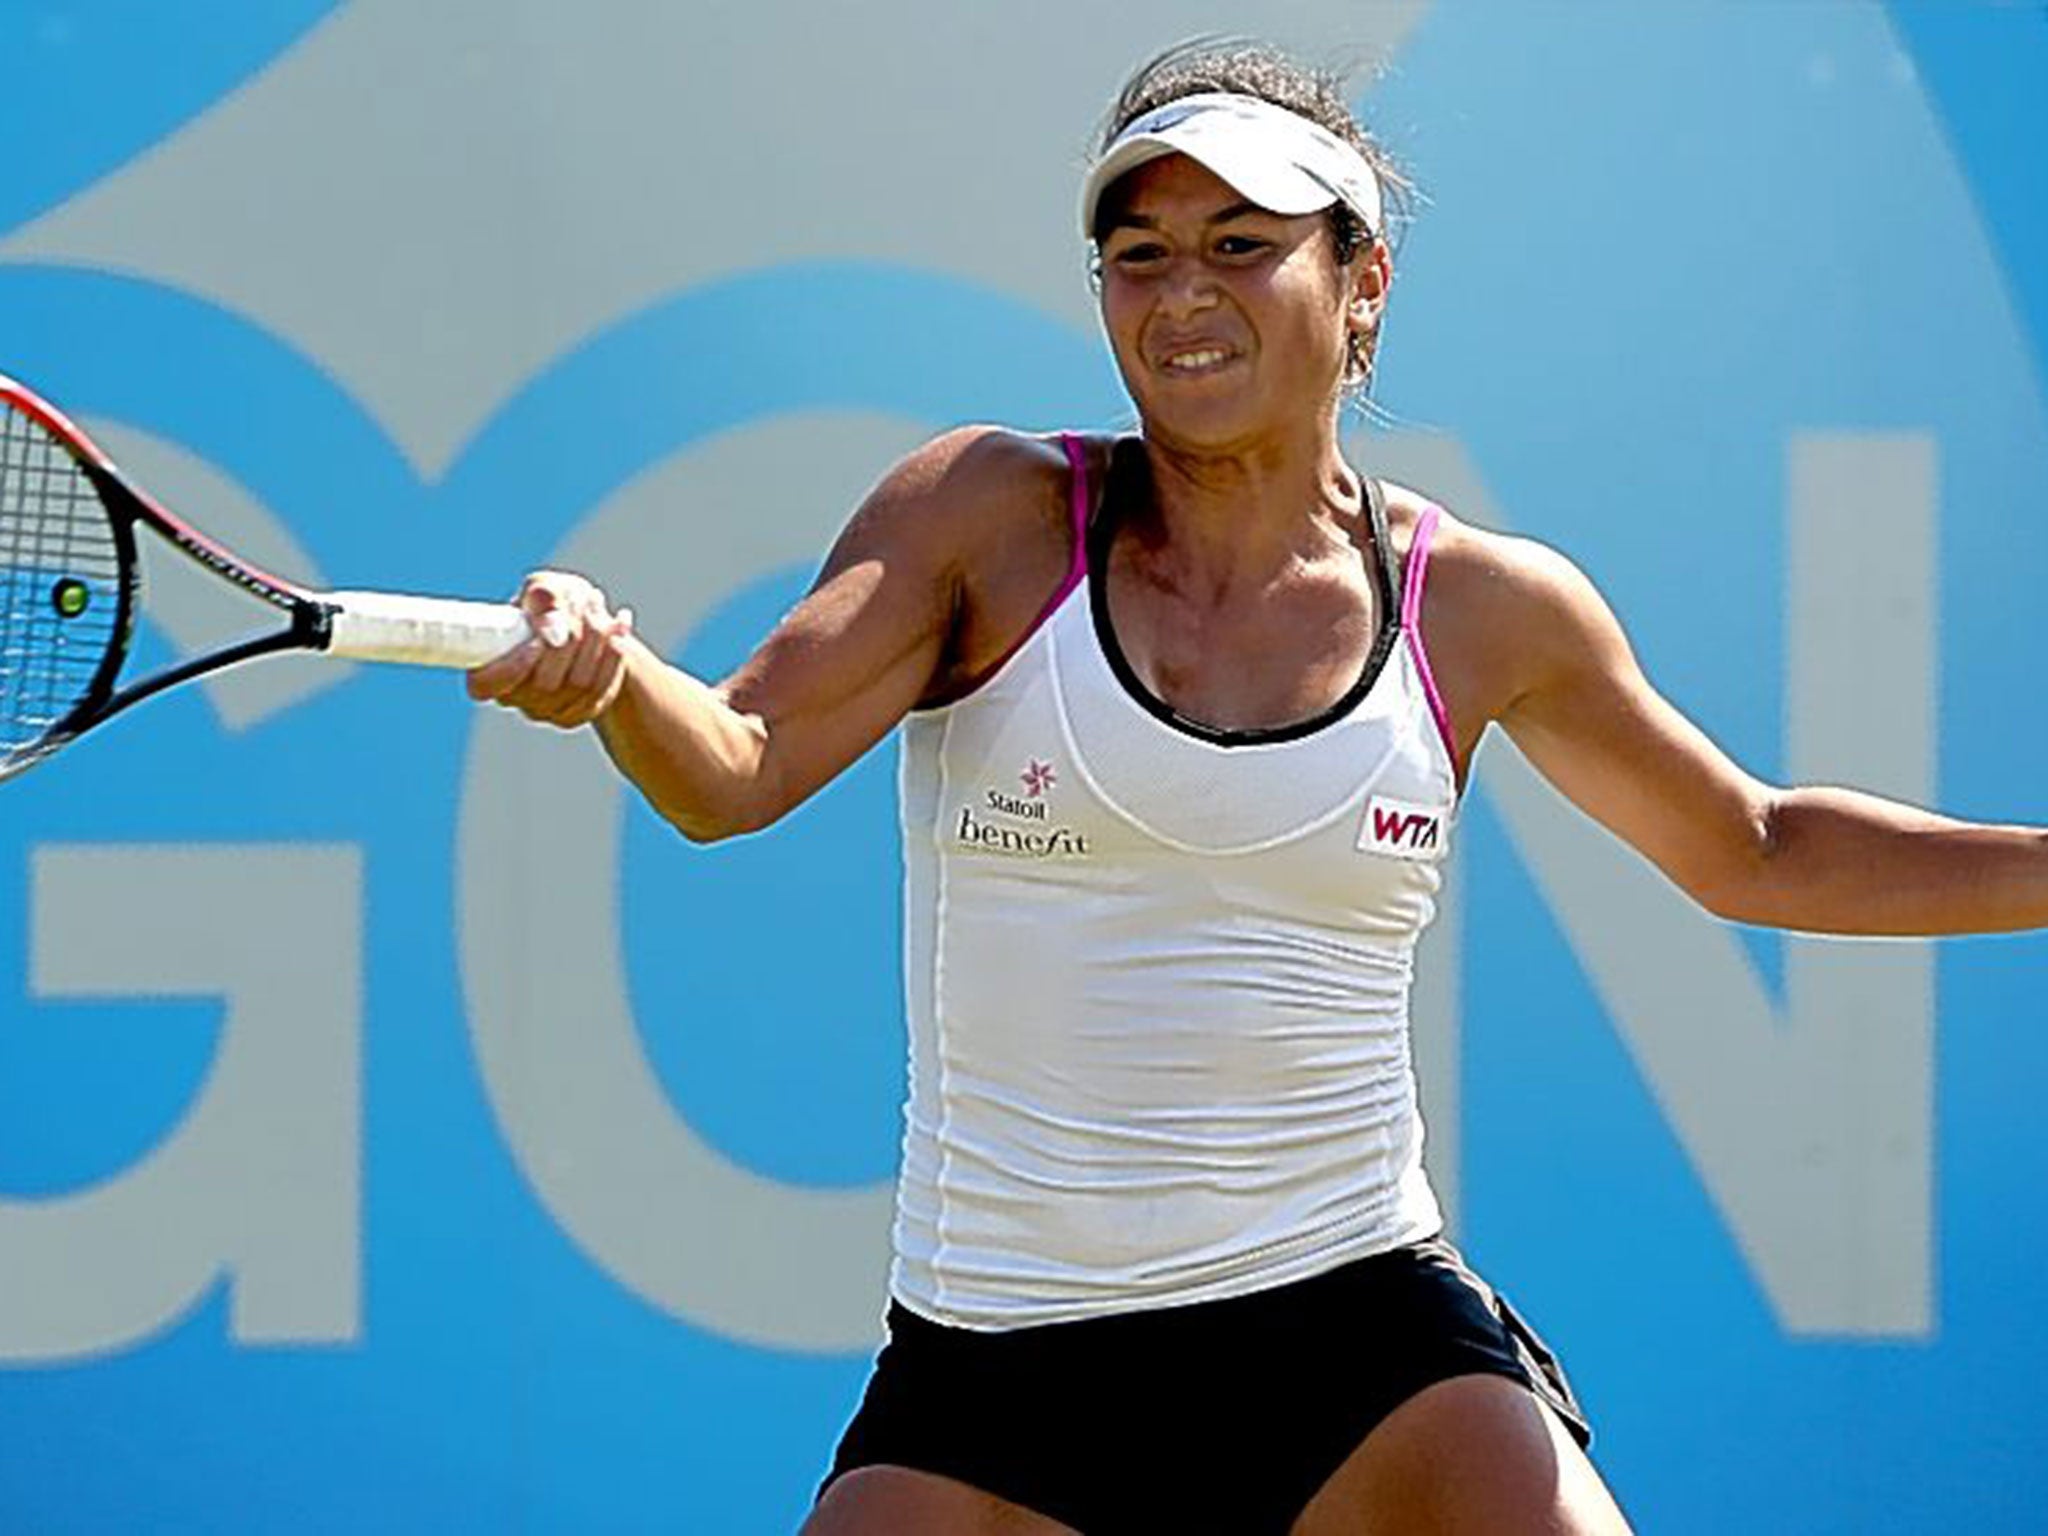 The British No 1 Heather Watson has discovered the perfect cure for her sleepless nights